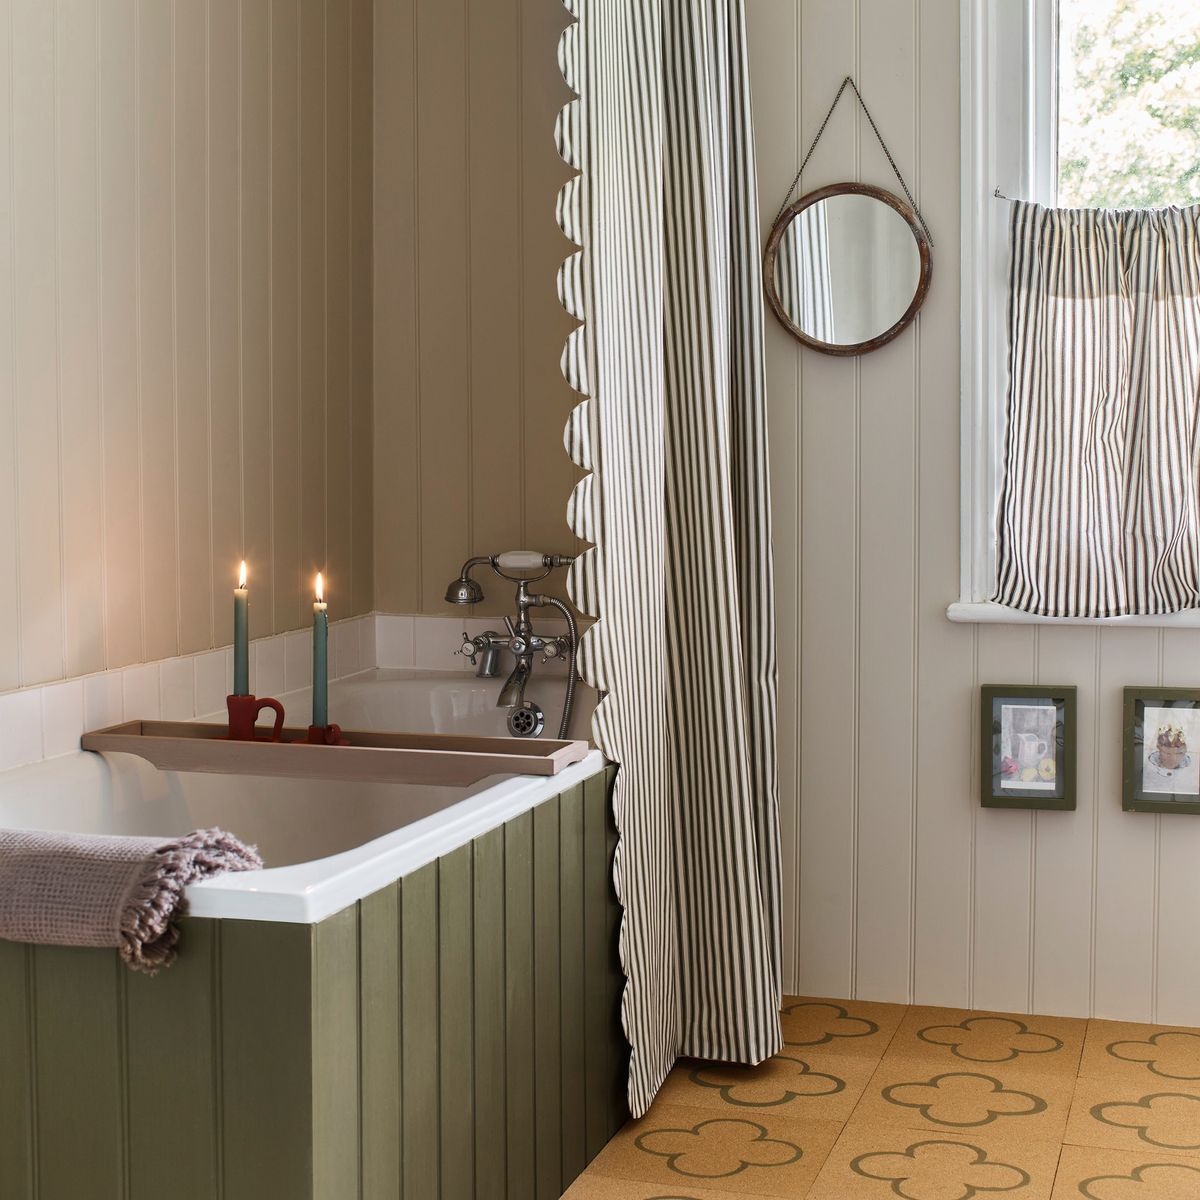 10 Spa Bathroom Ideas to Create Luxury for Less at Home - Bless'er House